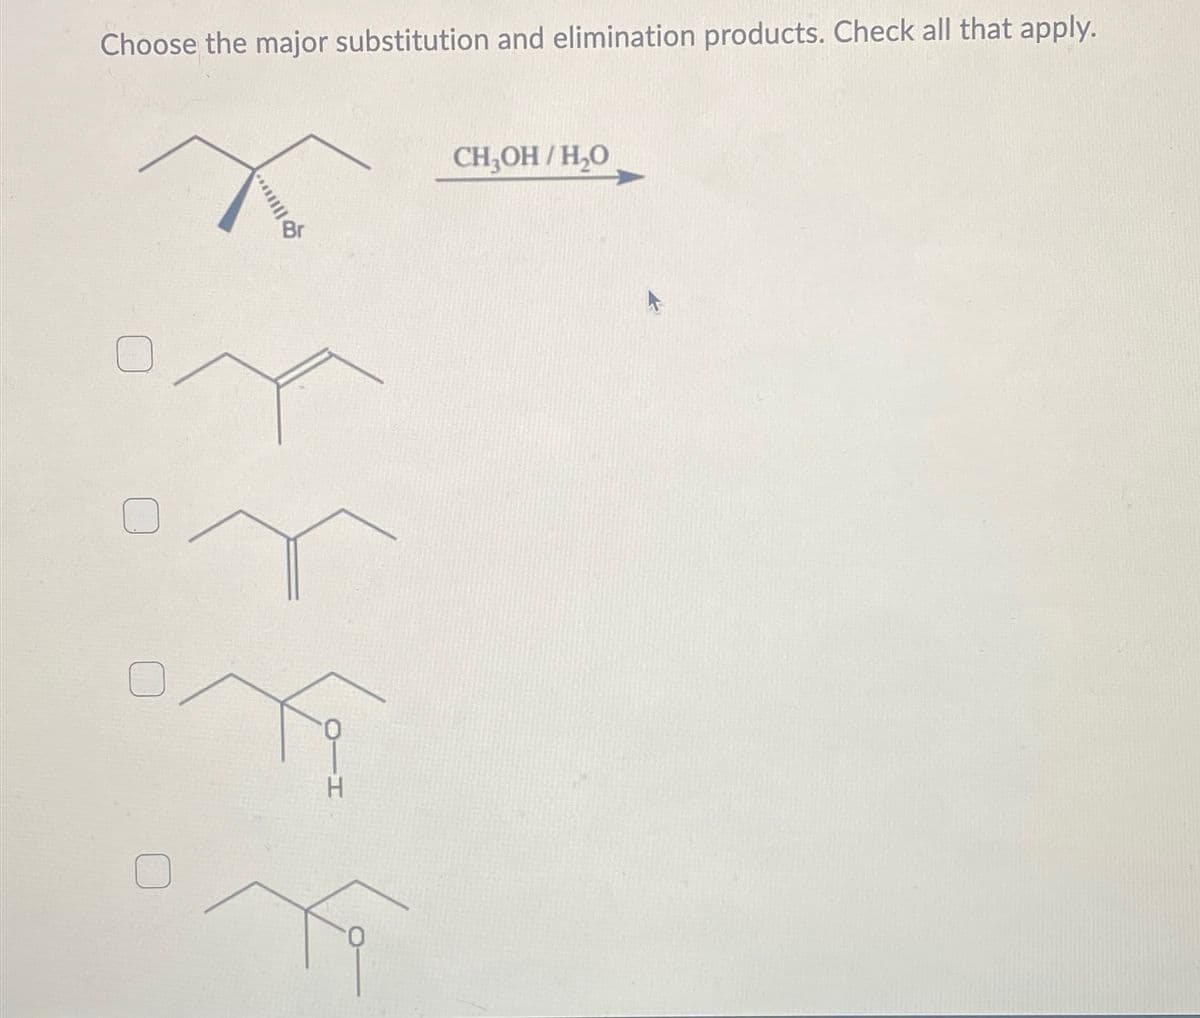 Choose the major substitution and elimination products. Check all that apply.
л
ি
CH₂OH/H₂O